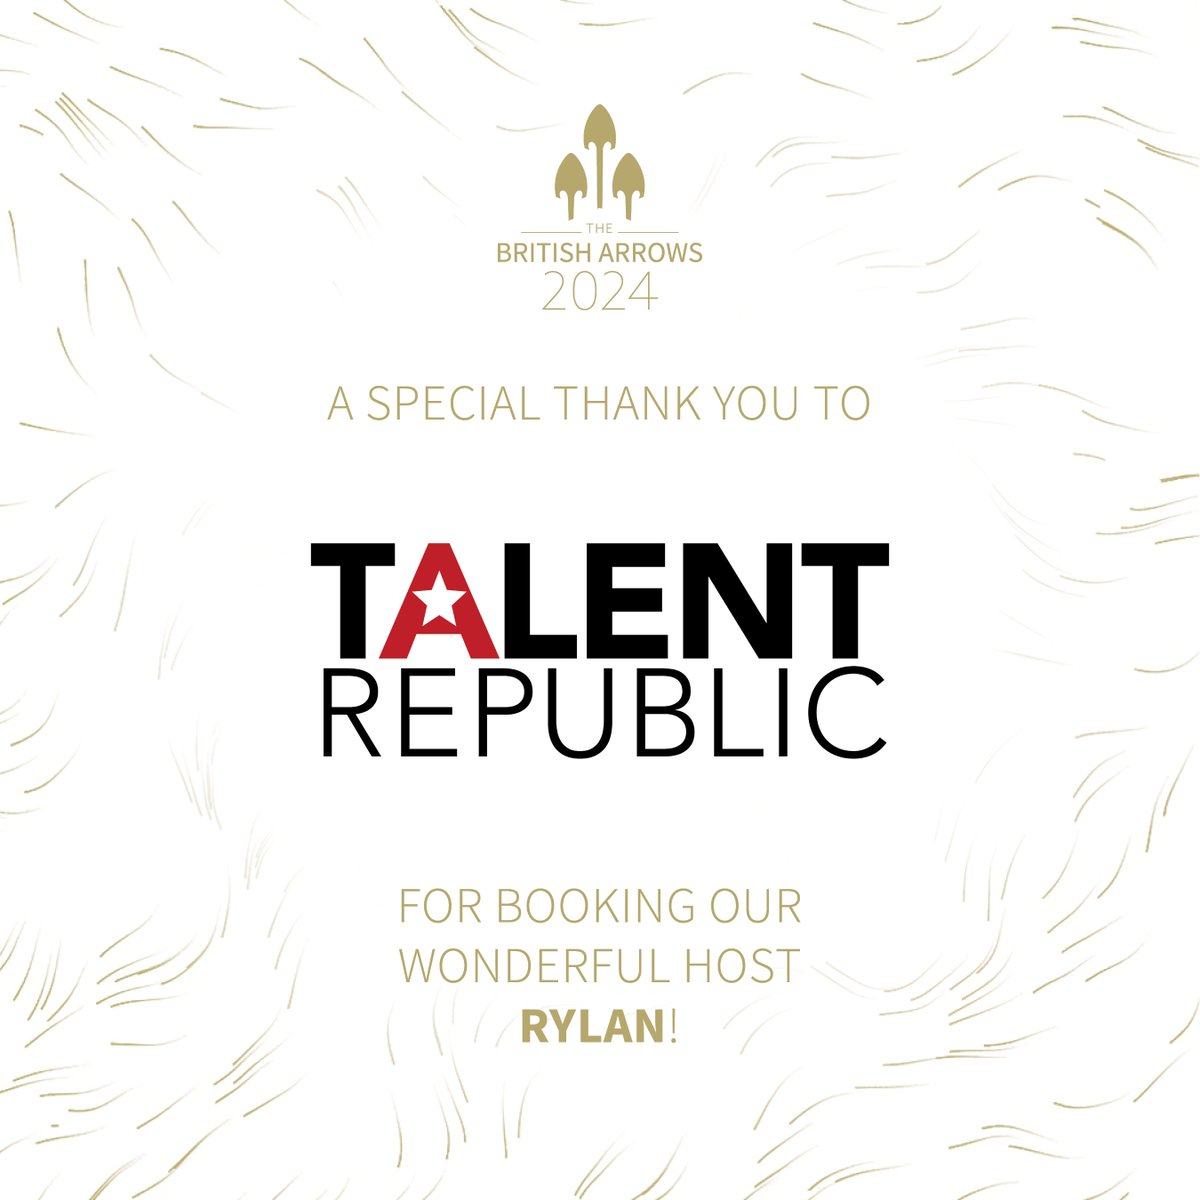 A special thank you to Talent Republic For booking our wonderful host Rylan! #BA23 #BA23 #BritishArrows #advertising #award #celebration